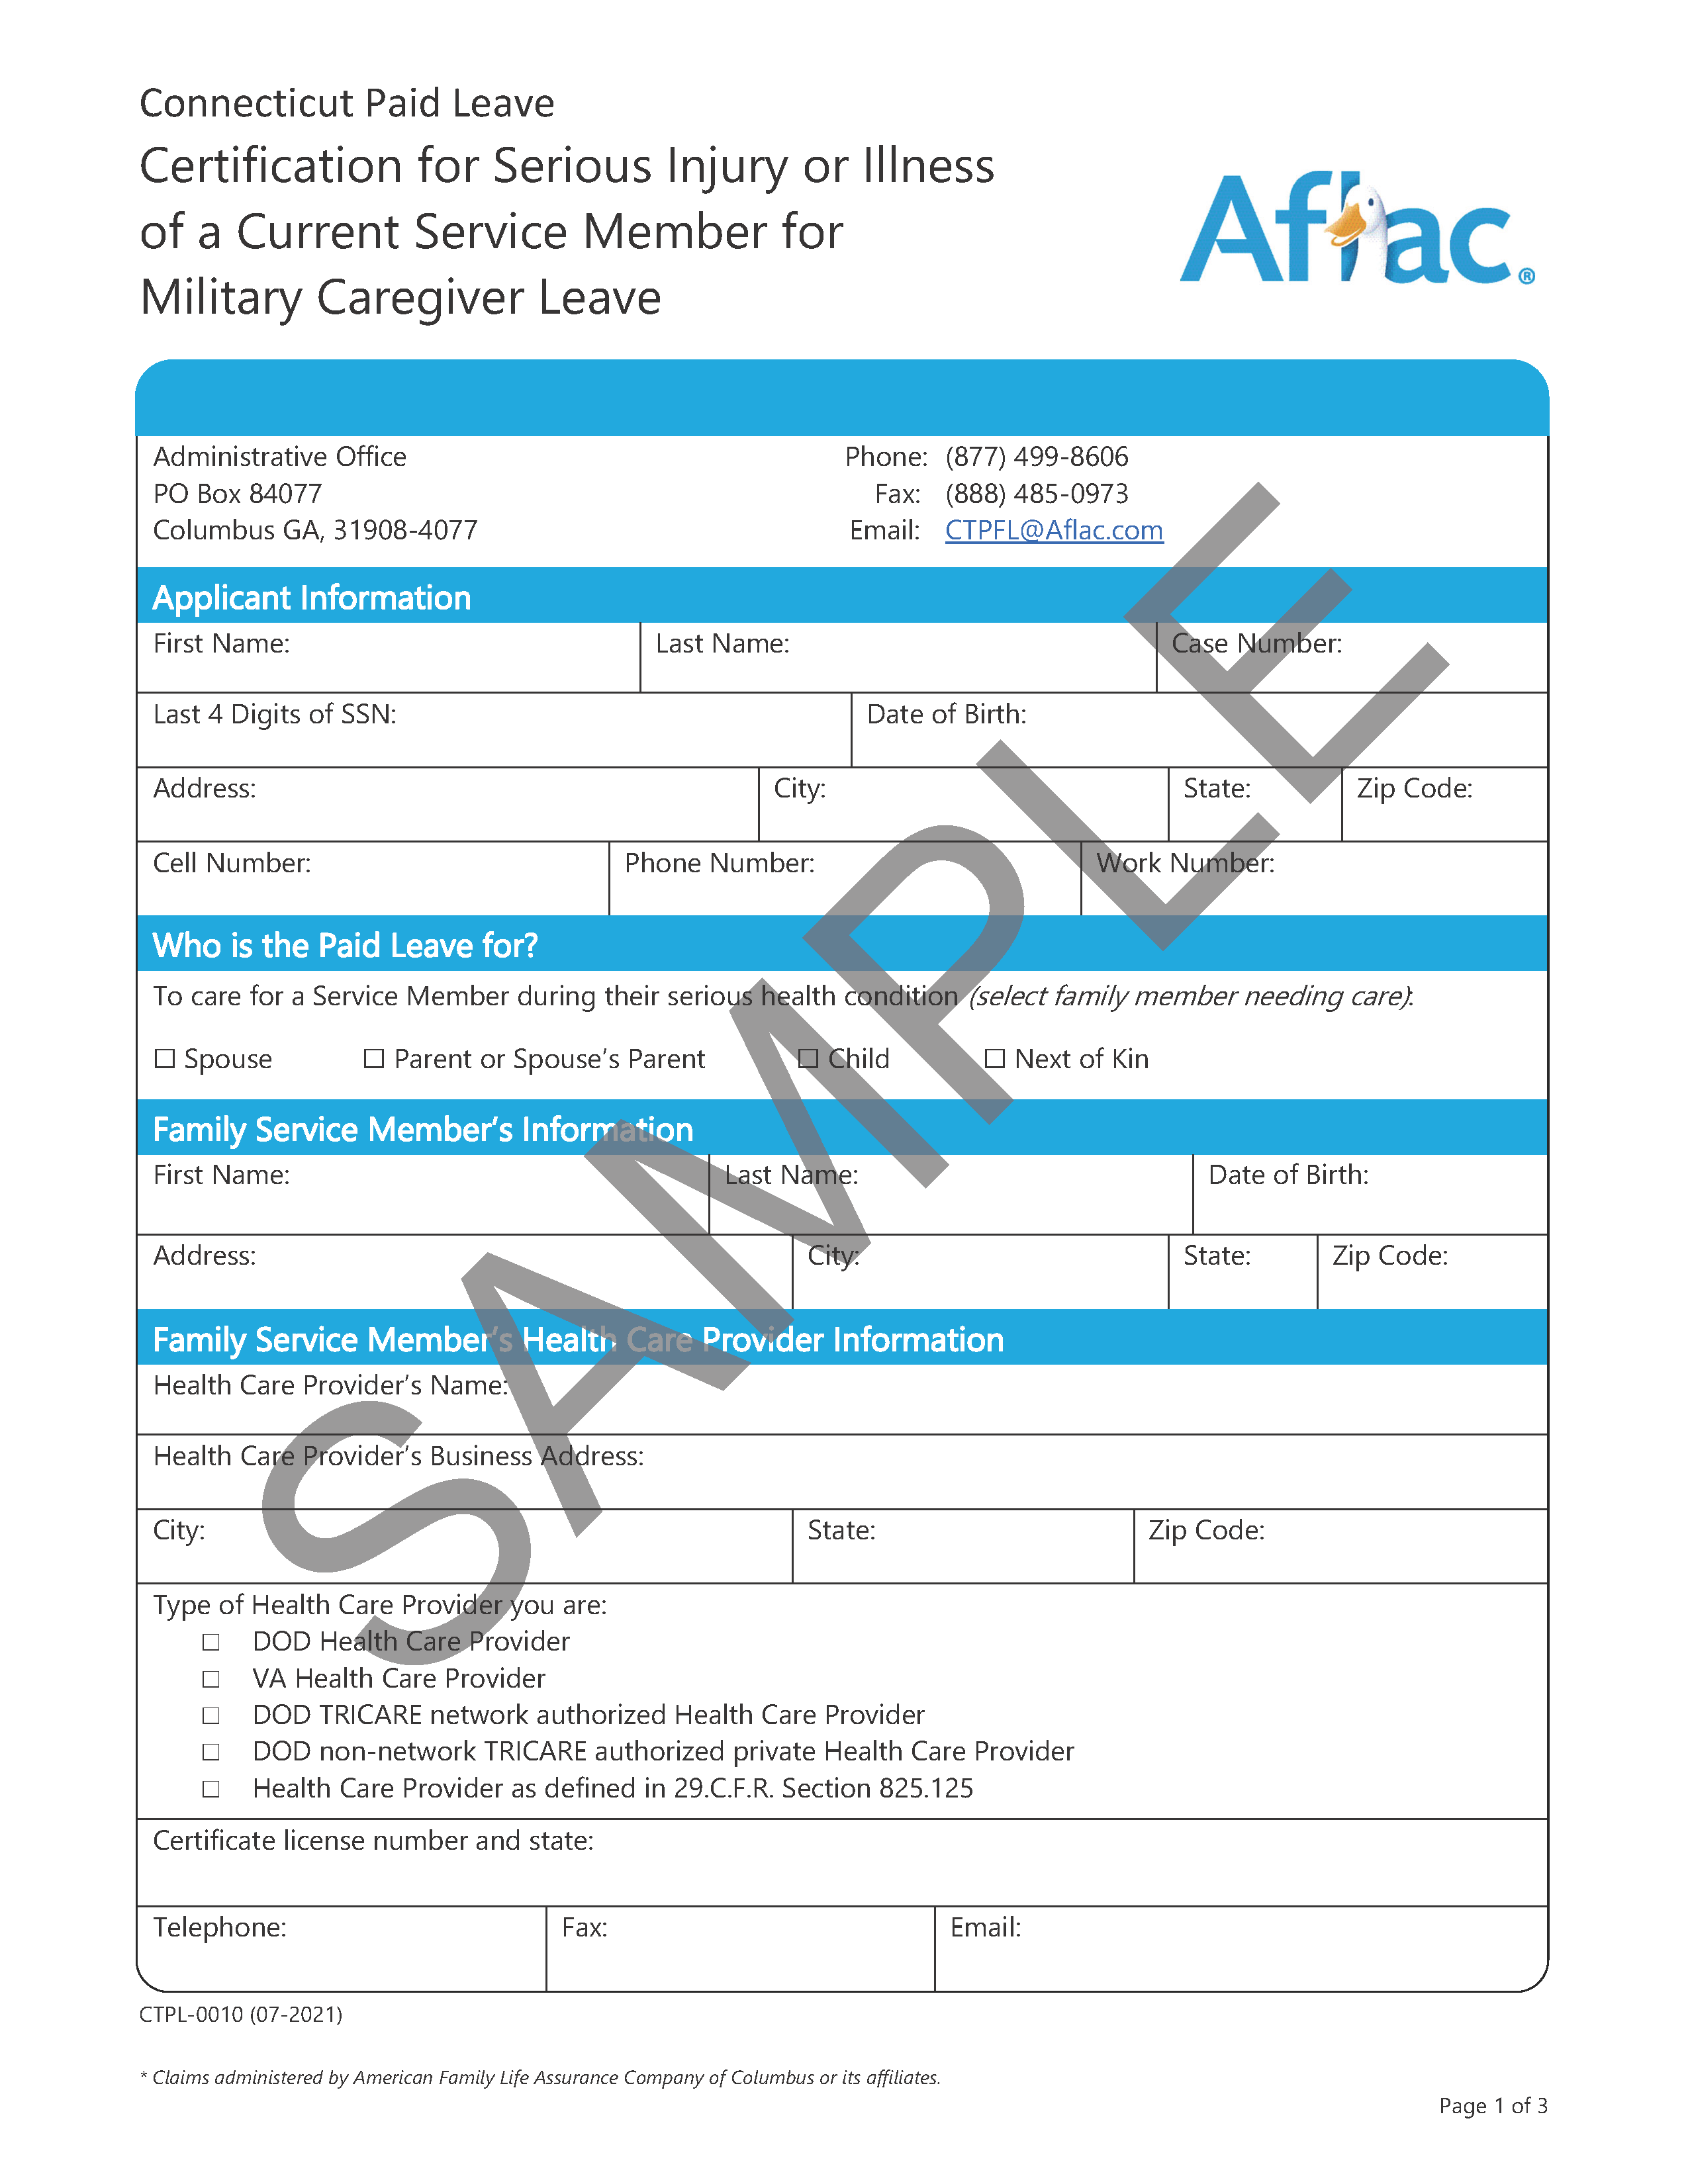 Sample Certification for Serious Injury or Illness of a Current Service Member for Military Caregiver Leave